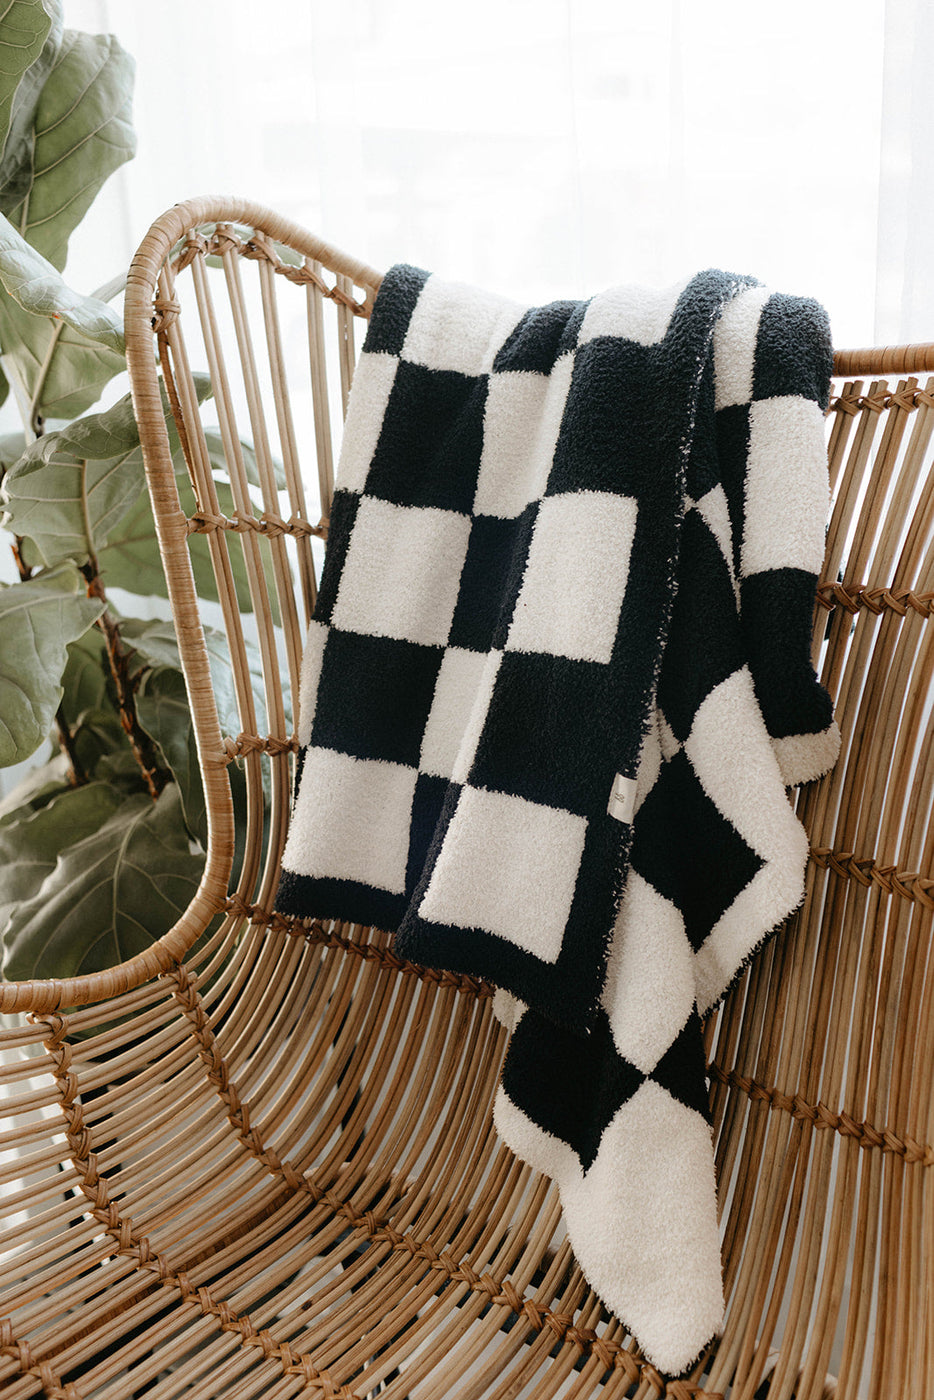 a black and white checkered blanket on a wicker chair